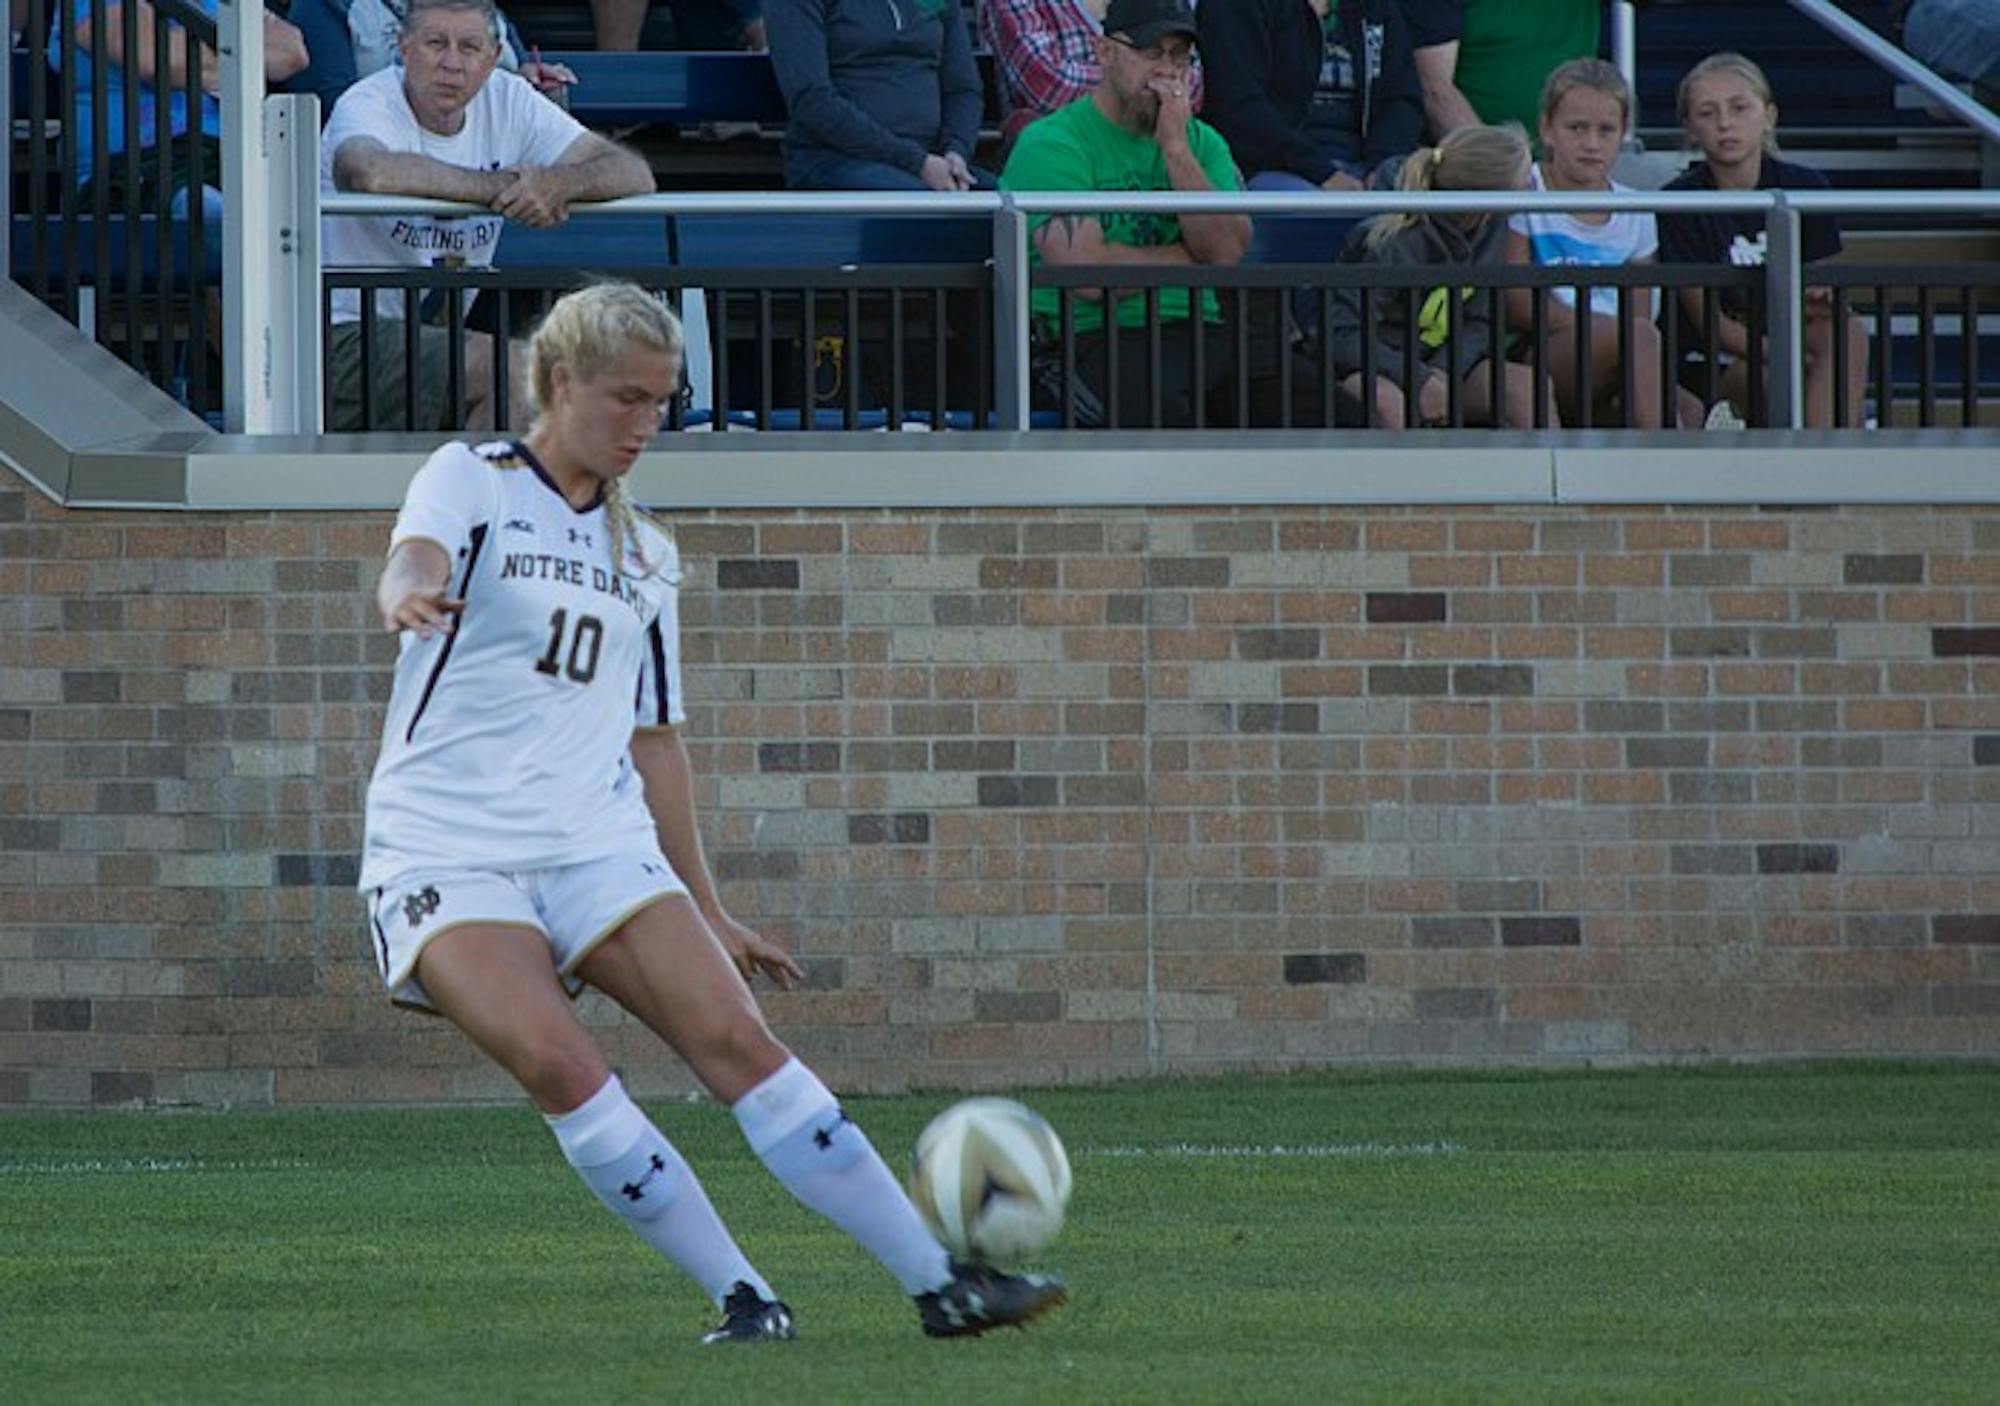 Irish sophomore forward Jennifer Westendorf crosses the ball during Notre Dame’s 1-0 victory over Illinois State on Sept. 2, 2016.